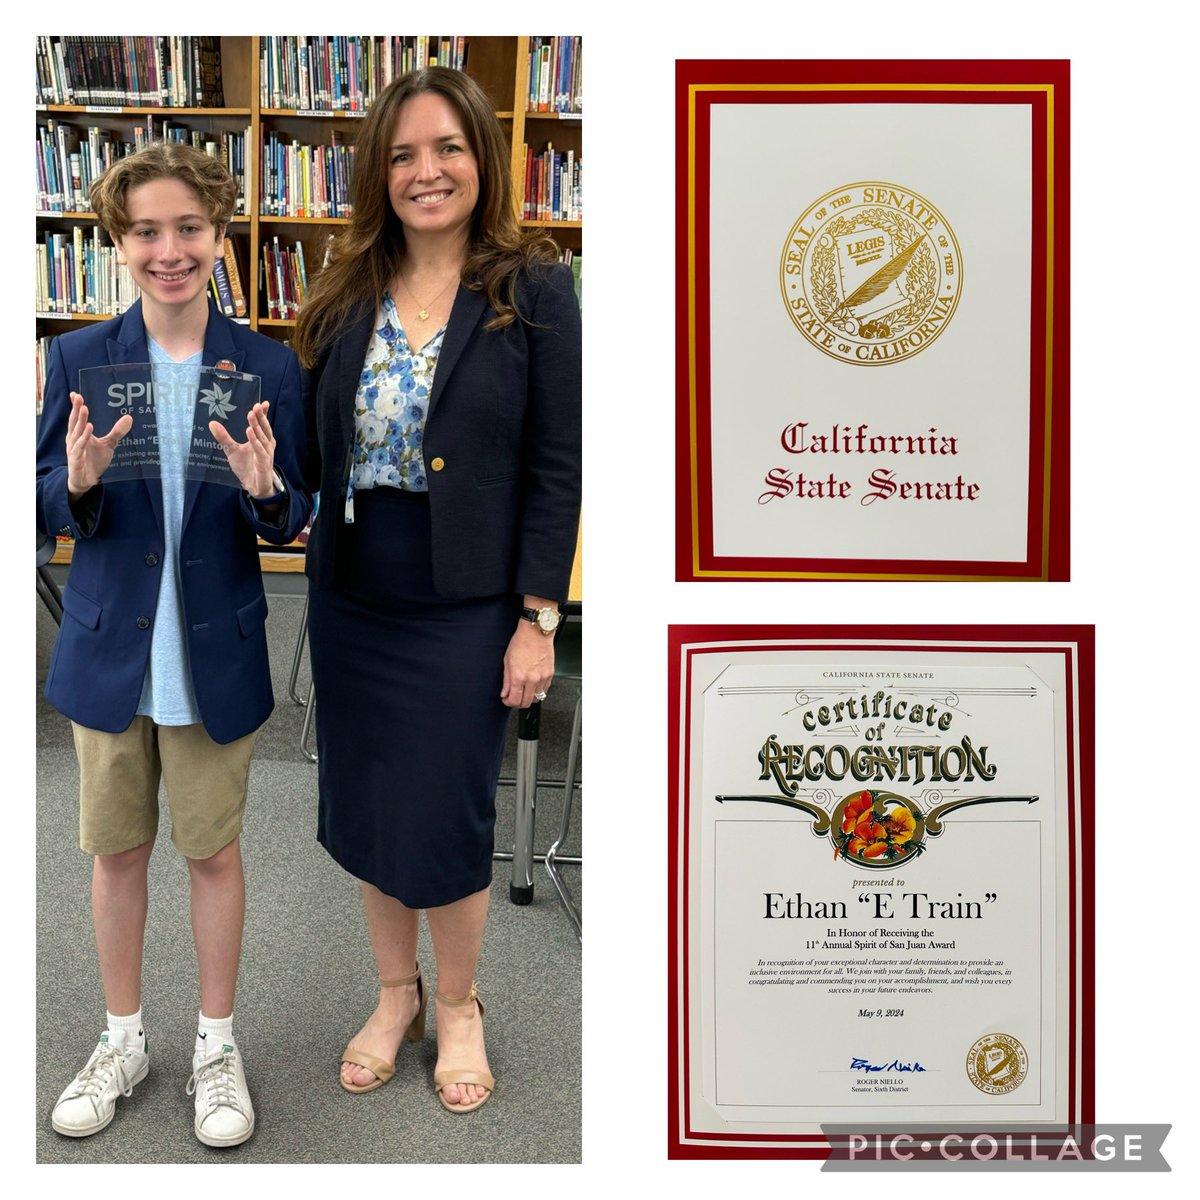 I was honored to meet and talk with @SanJuanUnified superintendent @M_Bassanelli Melissa Bassanelli yesterday, as well as receive two prestigious awards! Thank you so much Senator @SenRogerNiello & San Juan Unified SD for recognizing & supporting my literary advocacy journey! I